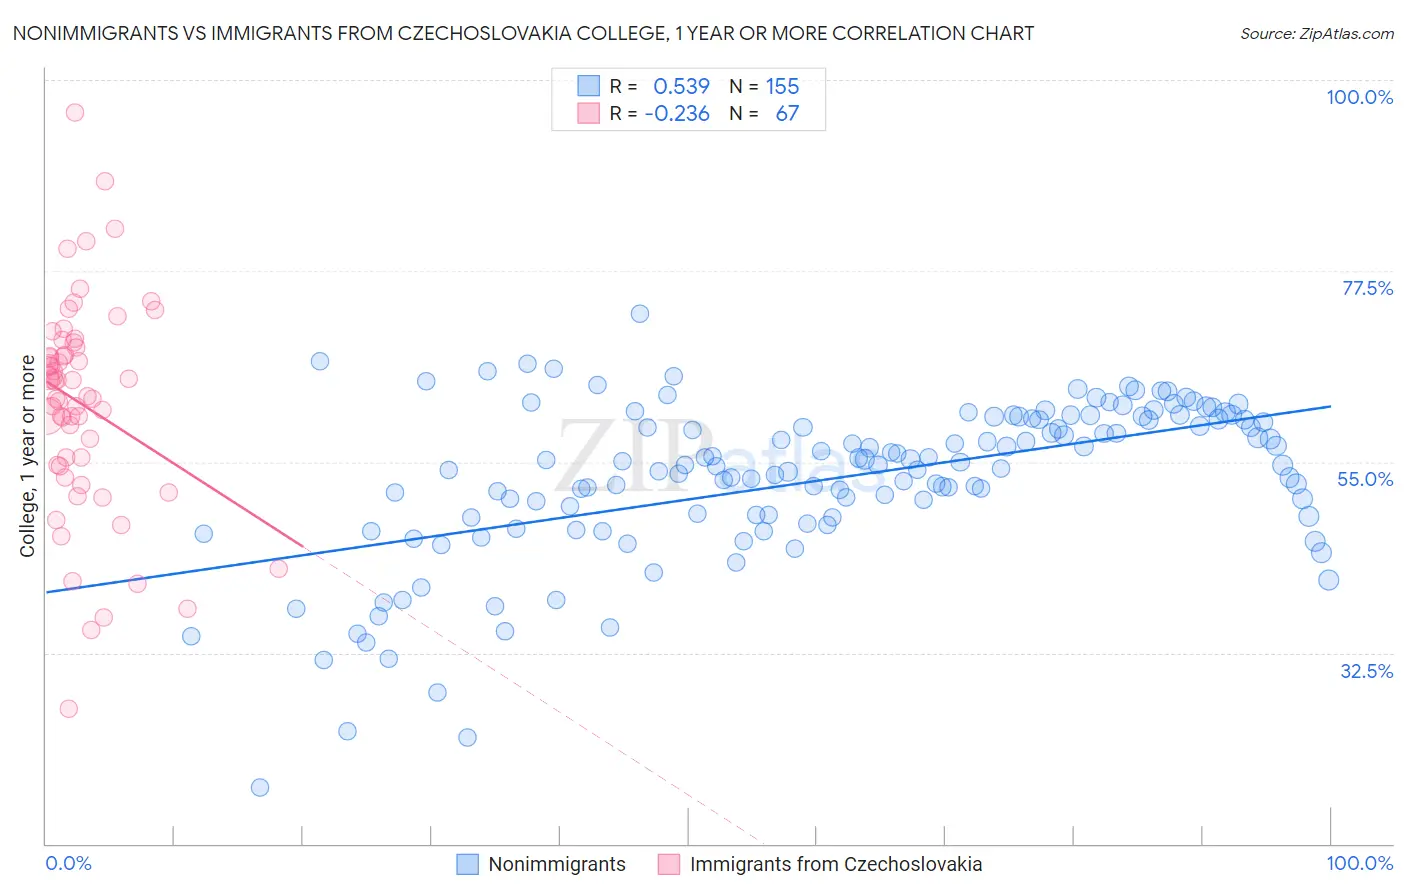 Nonimmigrants vs Immigrants from Czechoslovakia College, 1 year or more